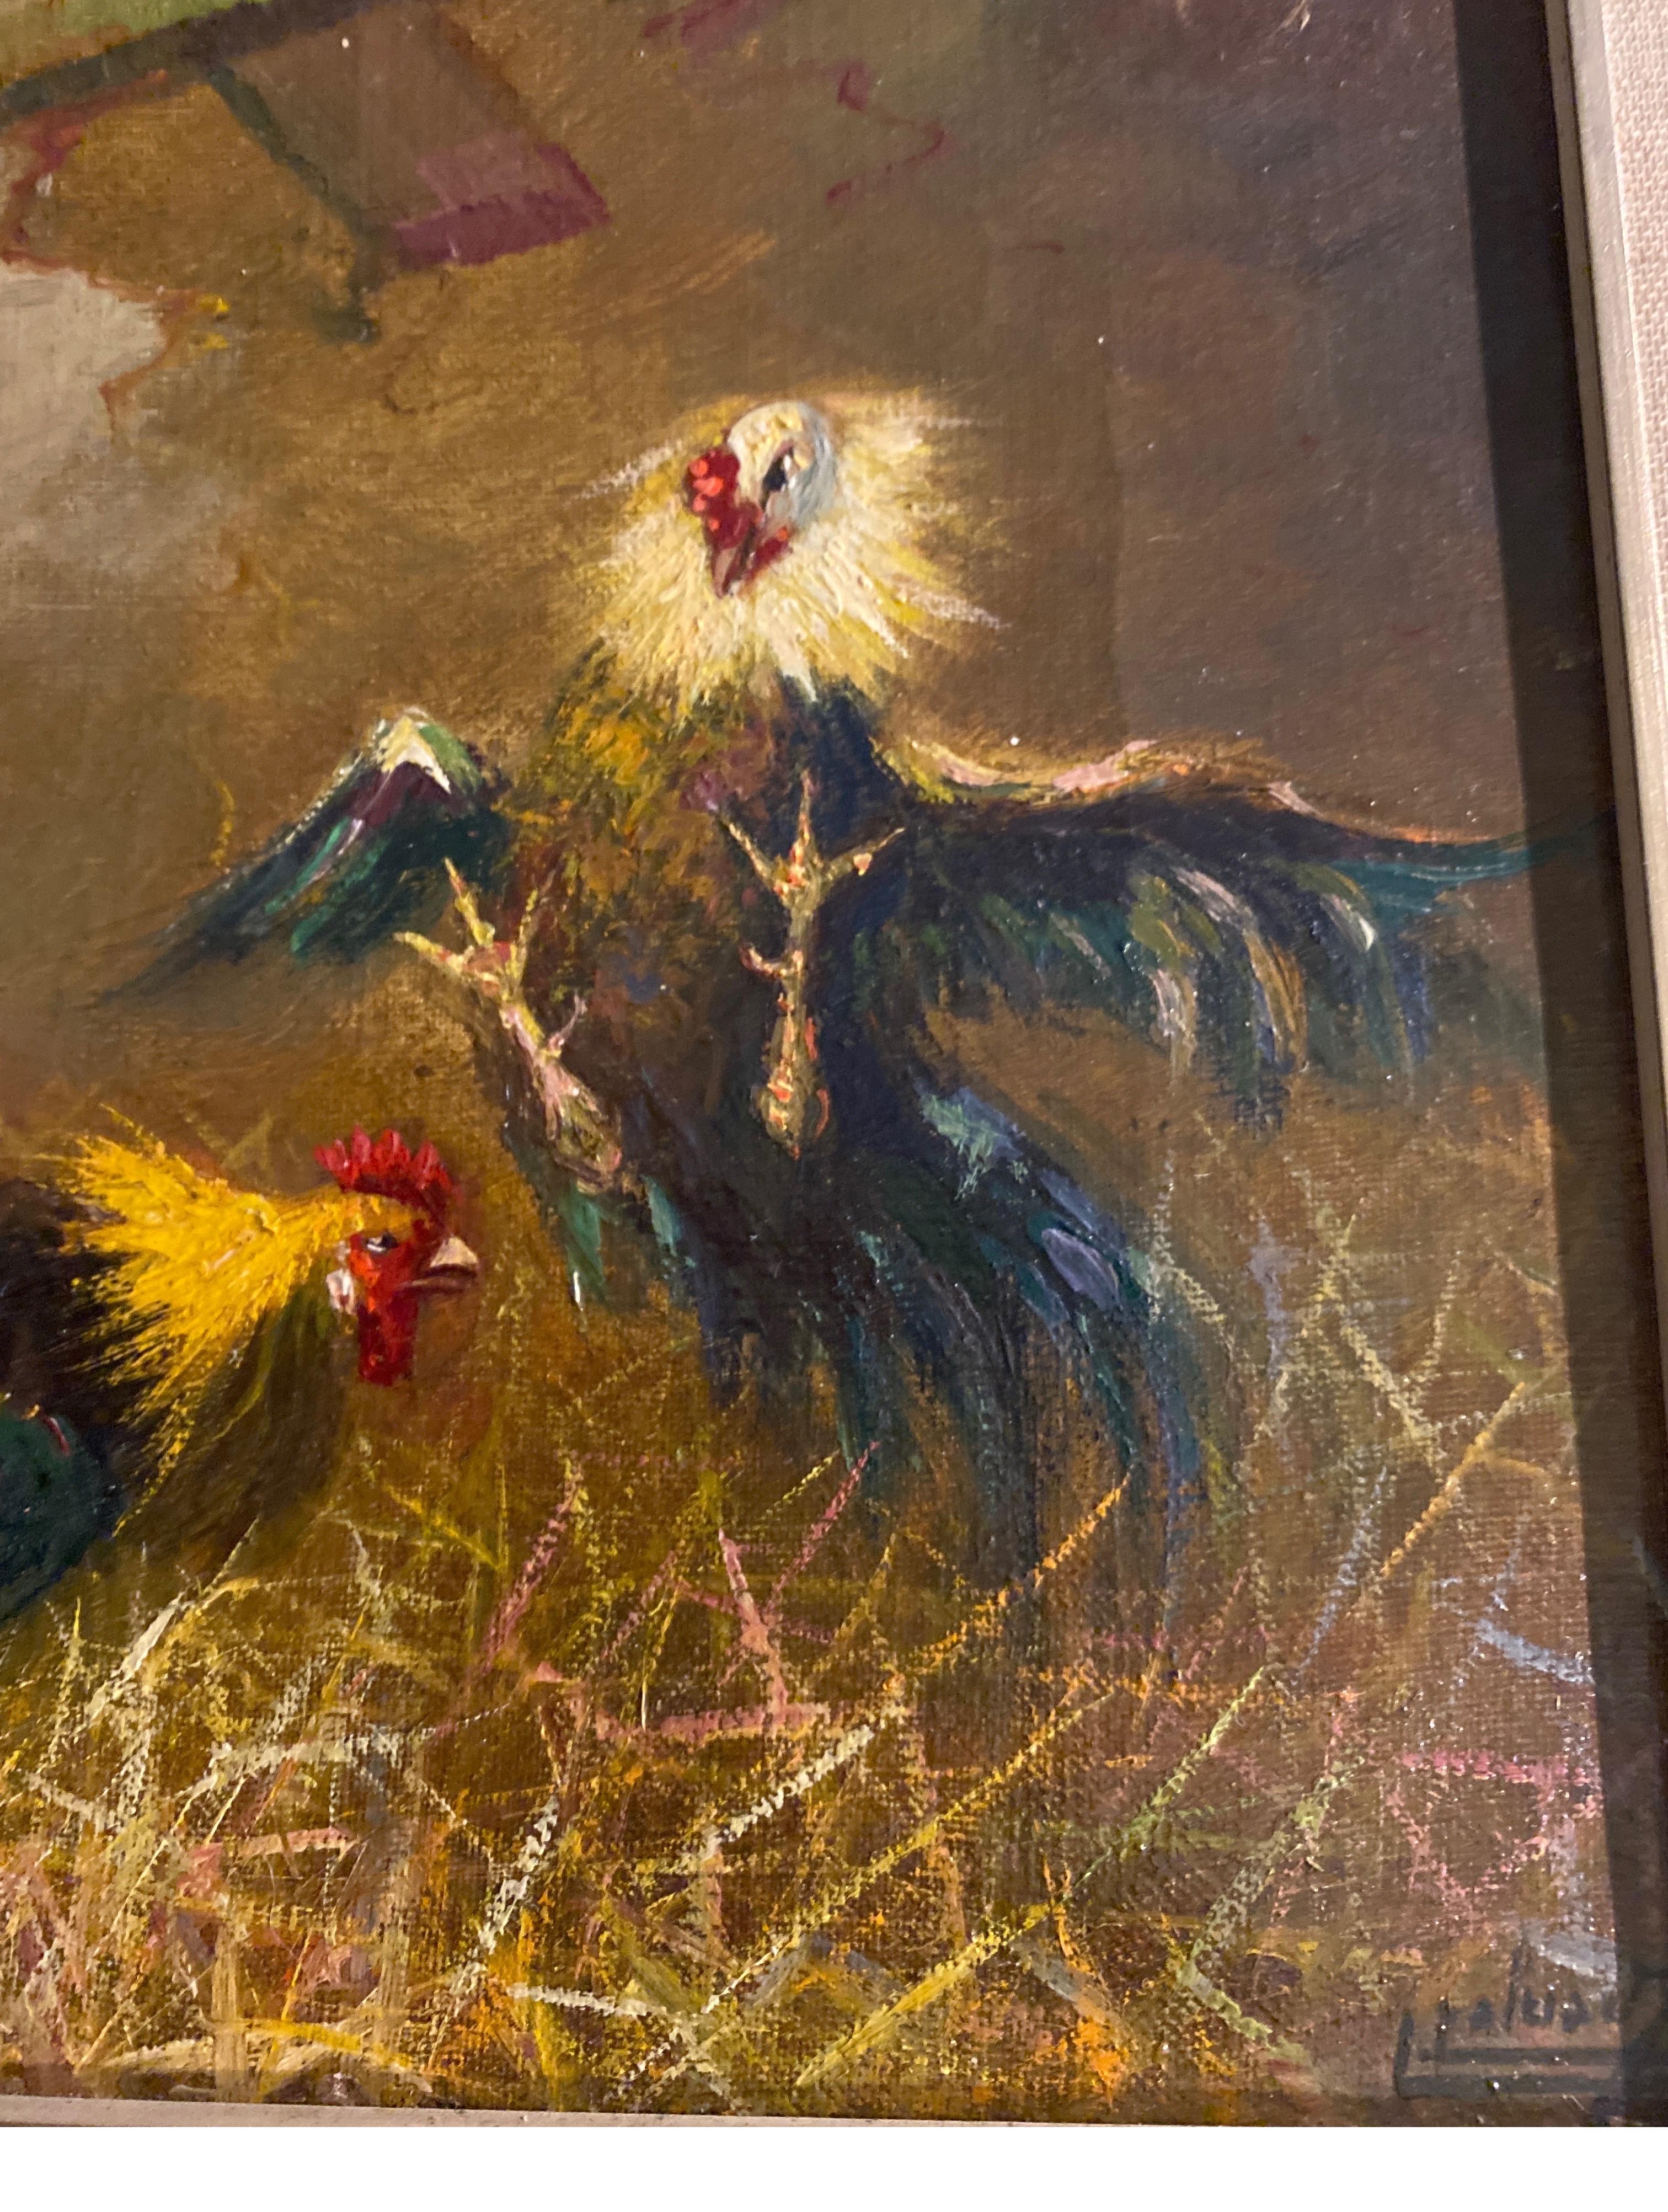 Hand-Painted Original Late 19th Century Oil Painting on Canvas of Roosters